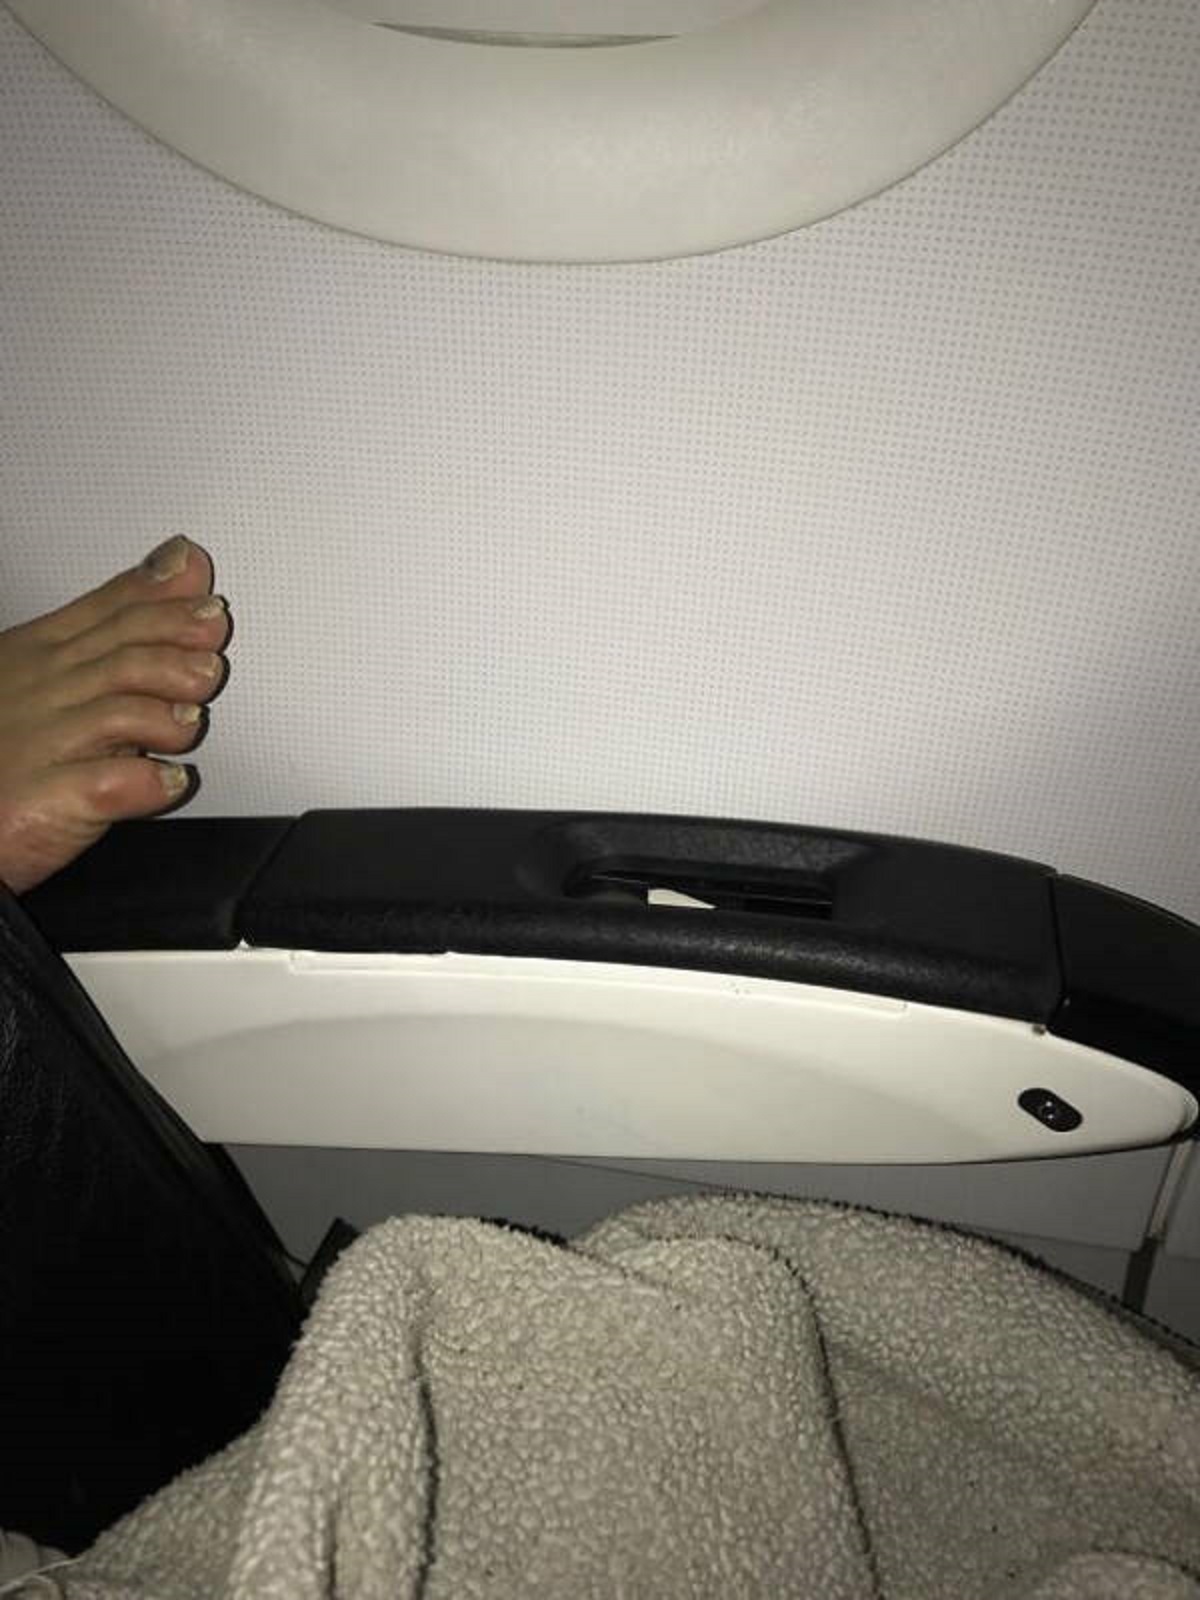 “Paid extra for a window seat to stay away from people and…”